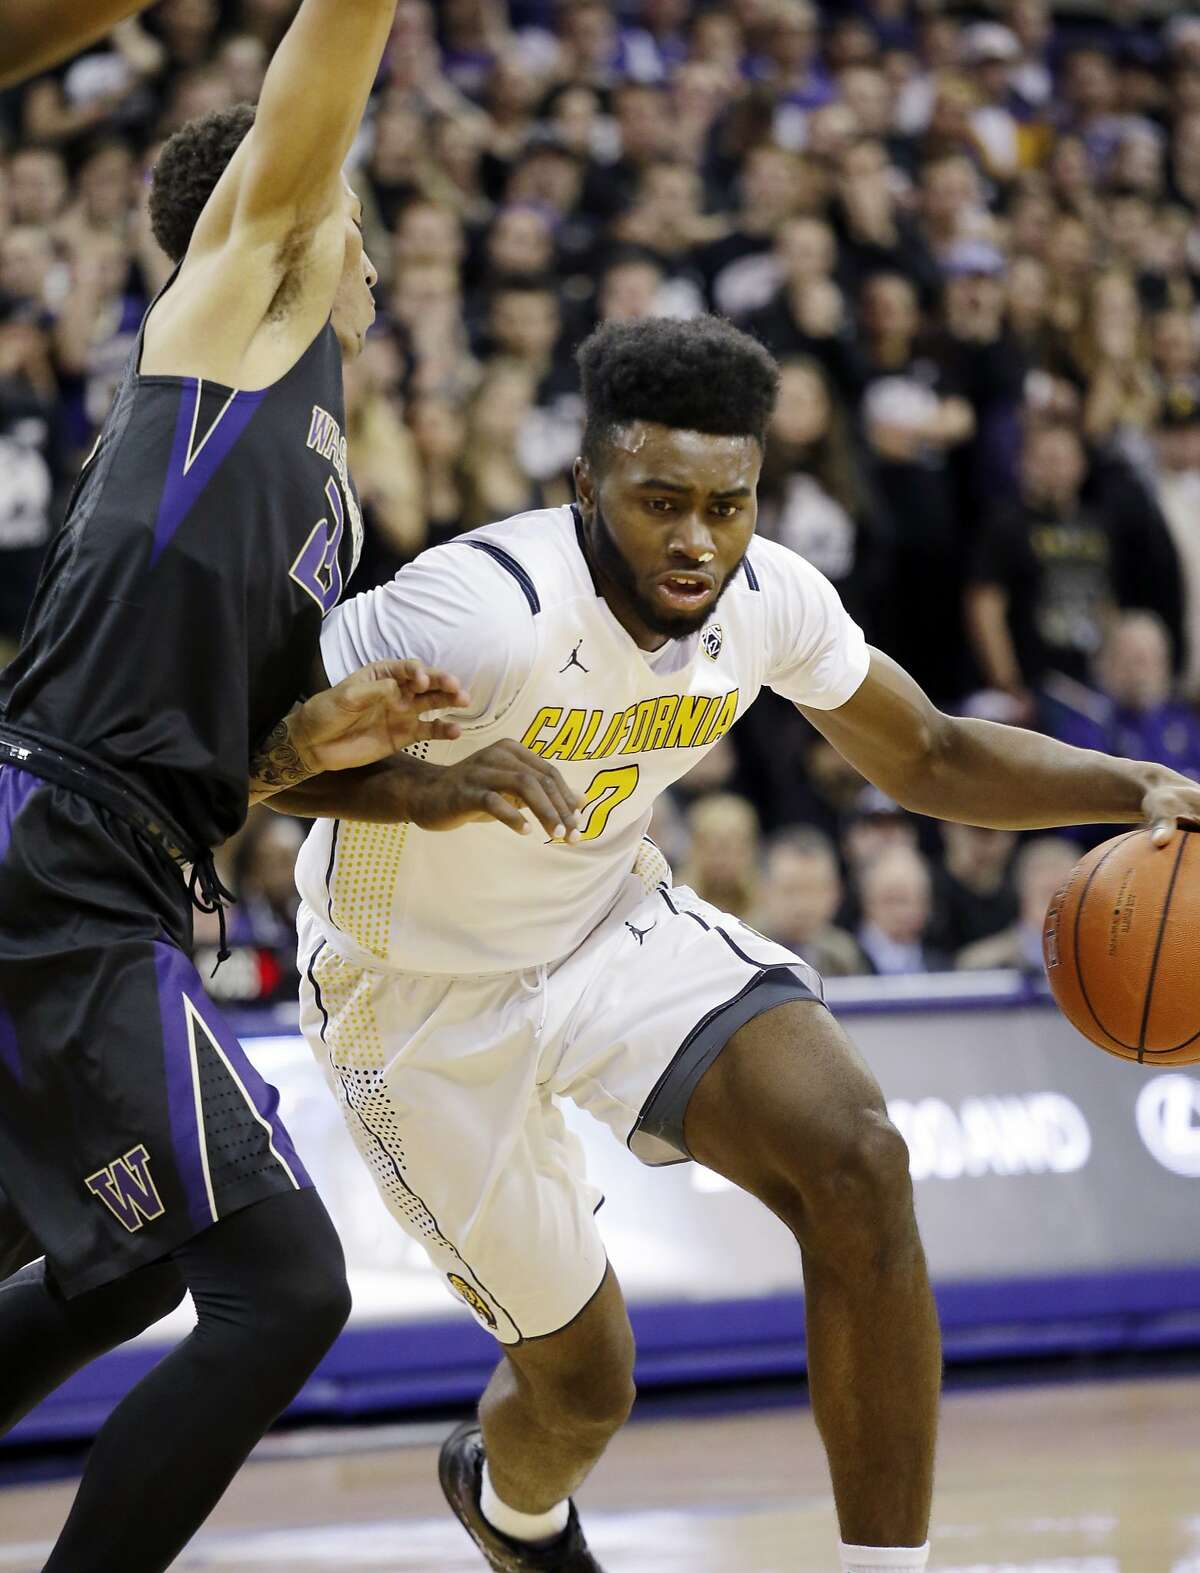 California's Jaylen Brown (0) tries to drive past Washington's Dominic Green during the first half of an NCAA college basketball game Thursday, Feb. 18, 2016, in Seattle. (AP Photo/Elaine Thompson)